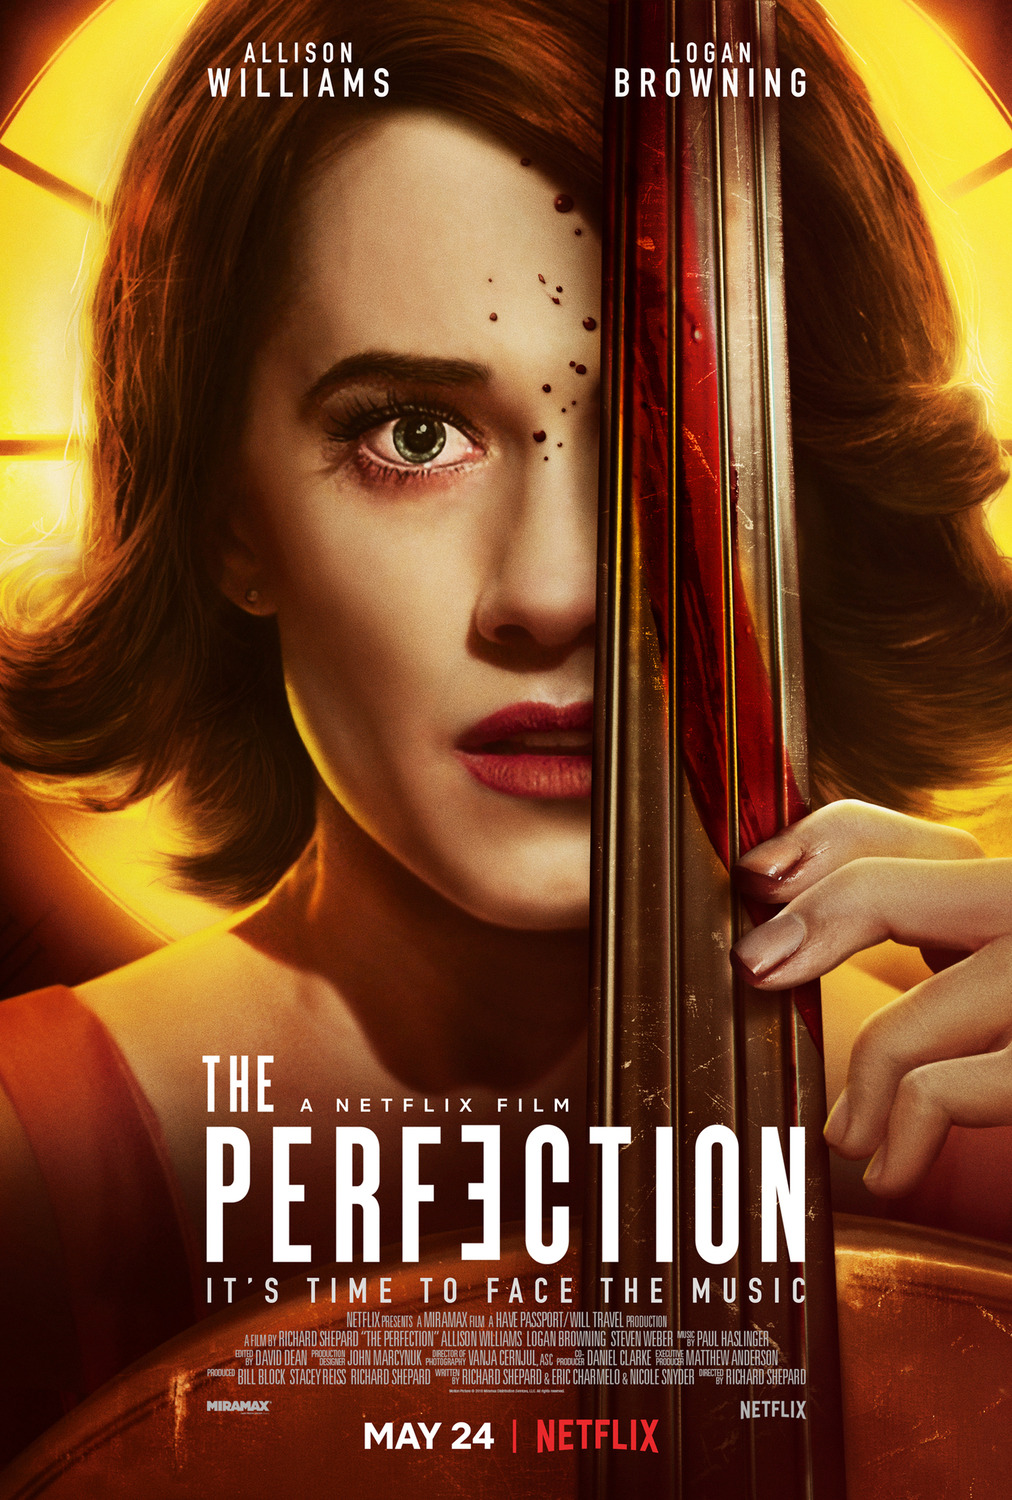 The Perfection film review: note-worthy nonsense